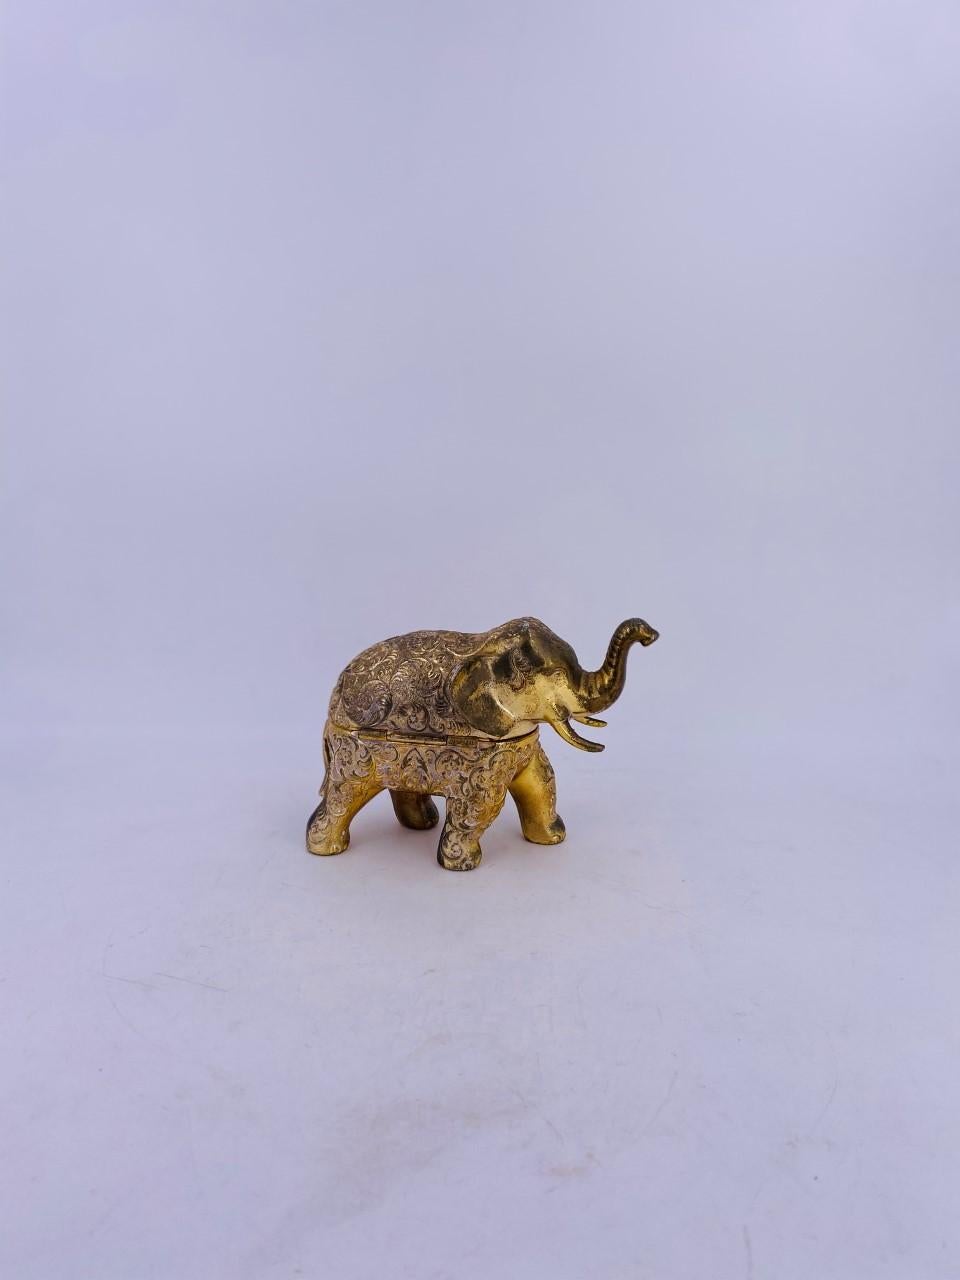 Beautifully gilded metal with patina music box in the shape of an elephant. This unique music box is vintage and made in Japan. The figure opens up and presents a beautiful red interior with a wind up handle that allows the mechanism to produce an